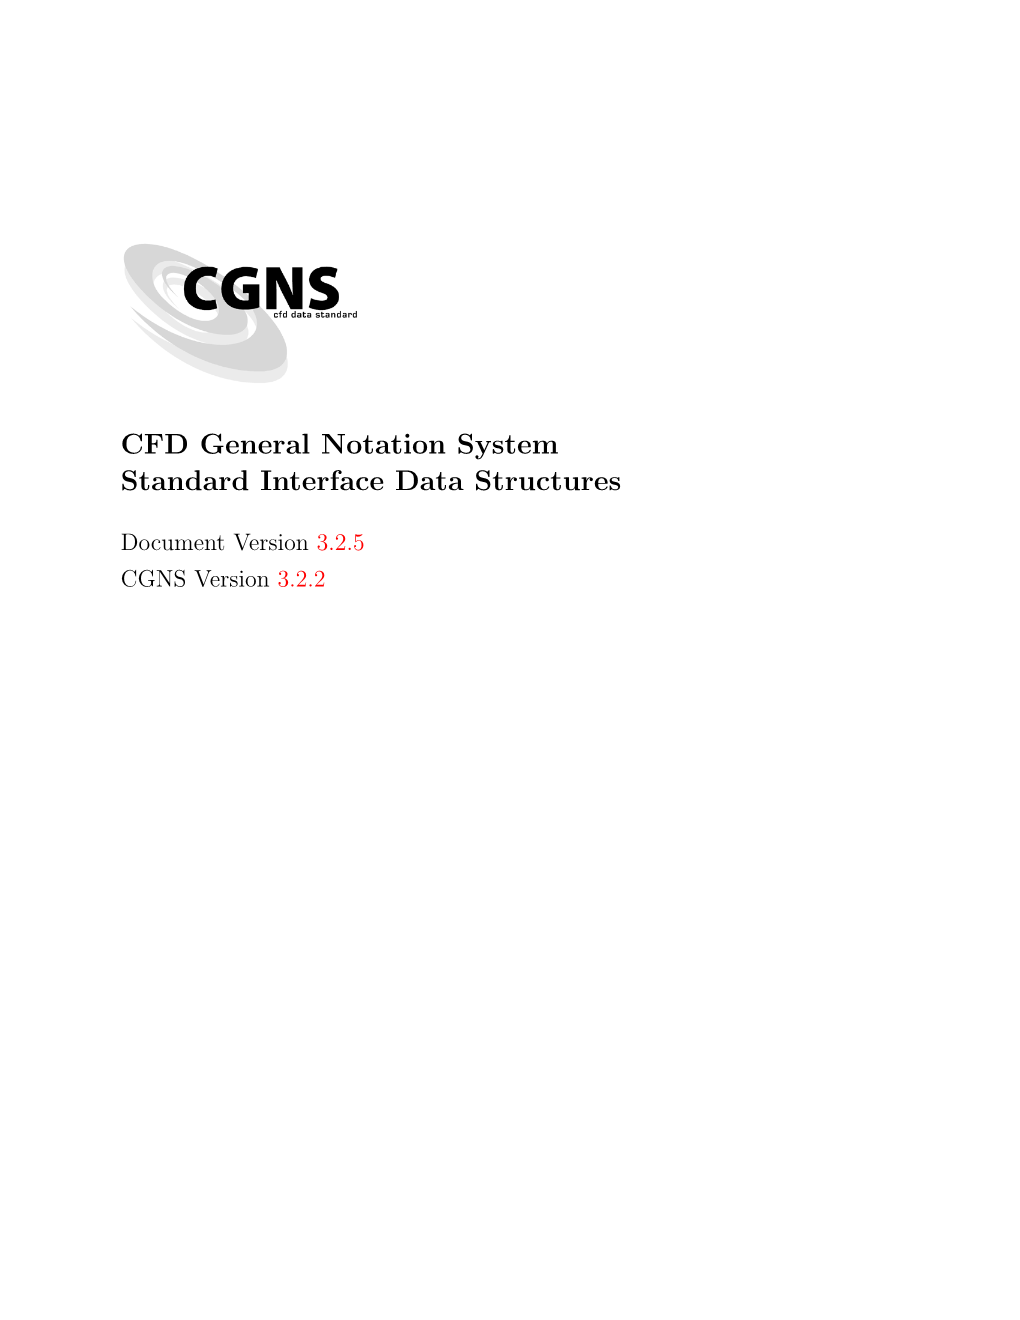 CFD General Notation System Standard Interface Data Structures